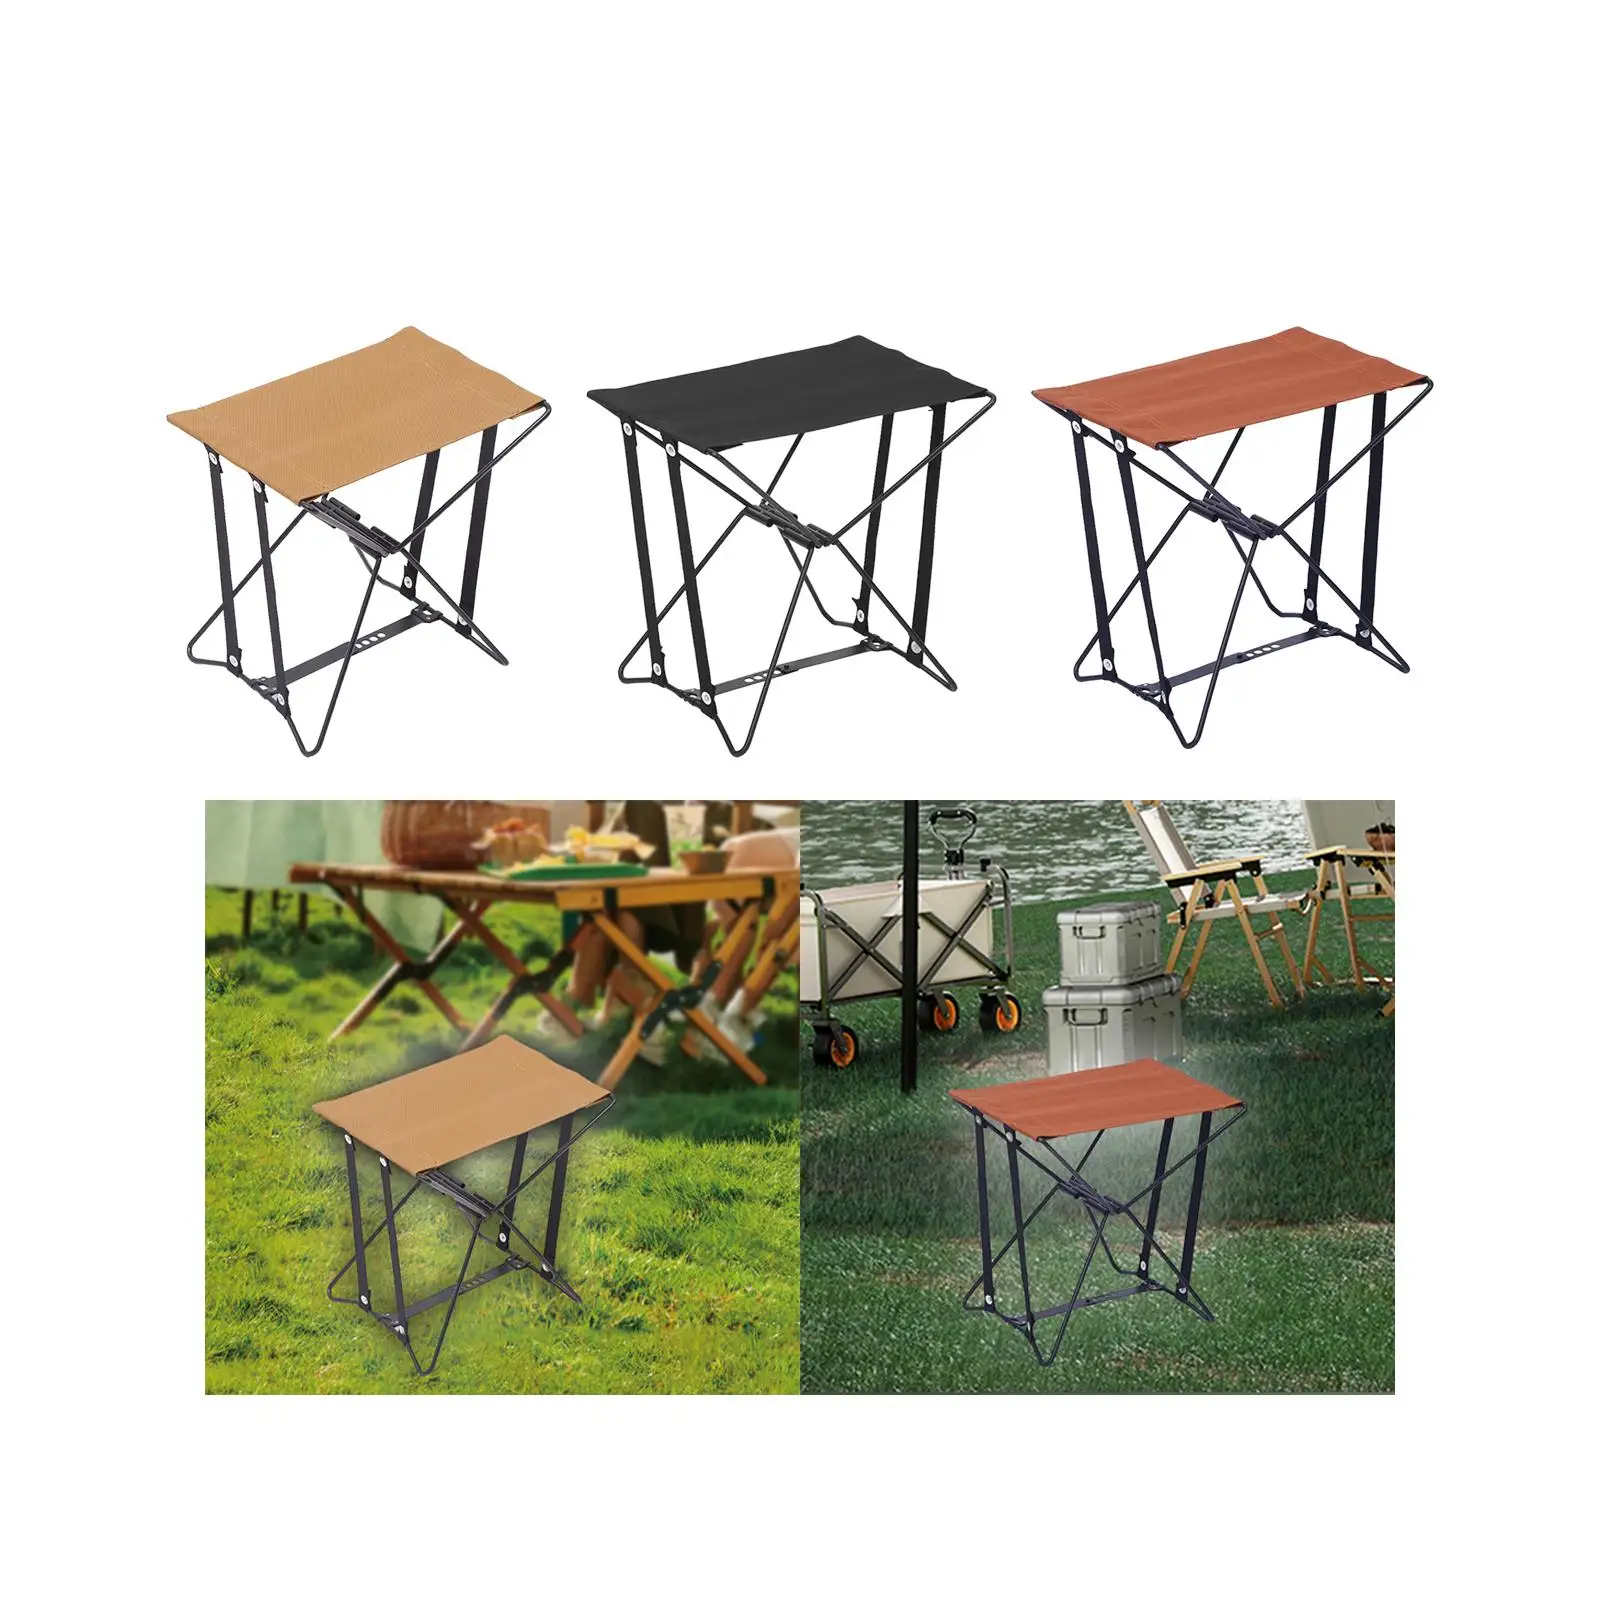 Portable Folding Stool recliner Foot Rest Seat Compact Camping Stool Saddle Chair for Patio Traveling Festival Fishing Concert